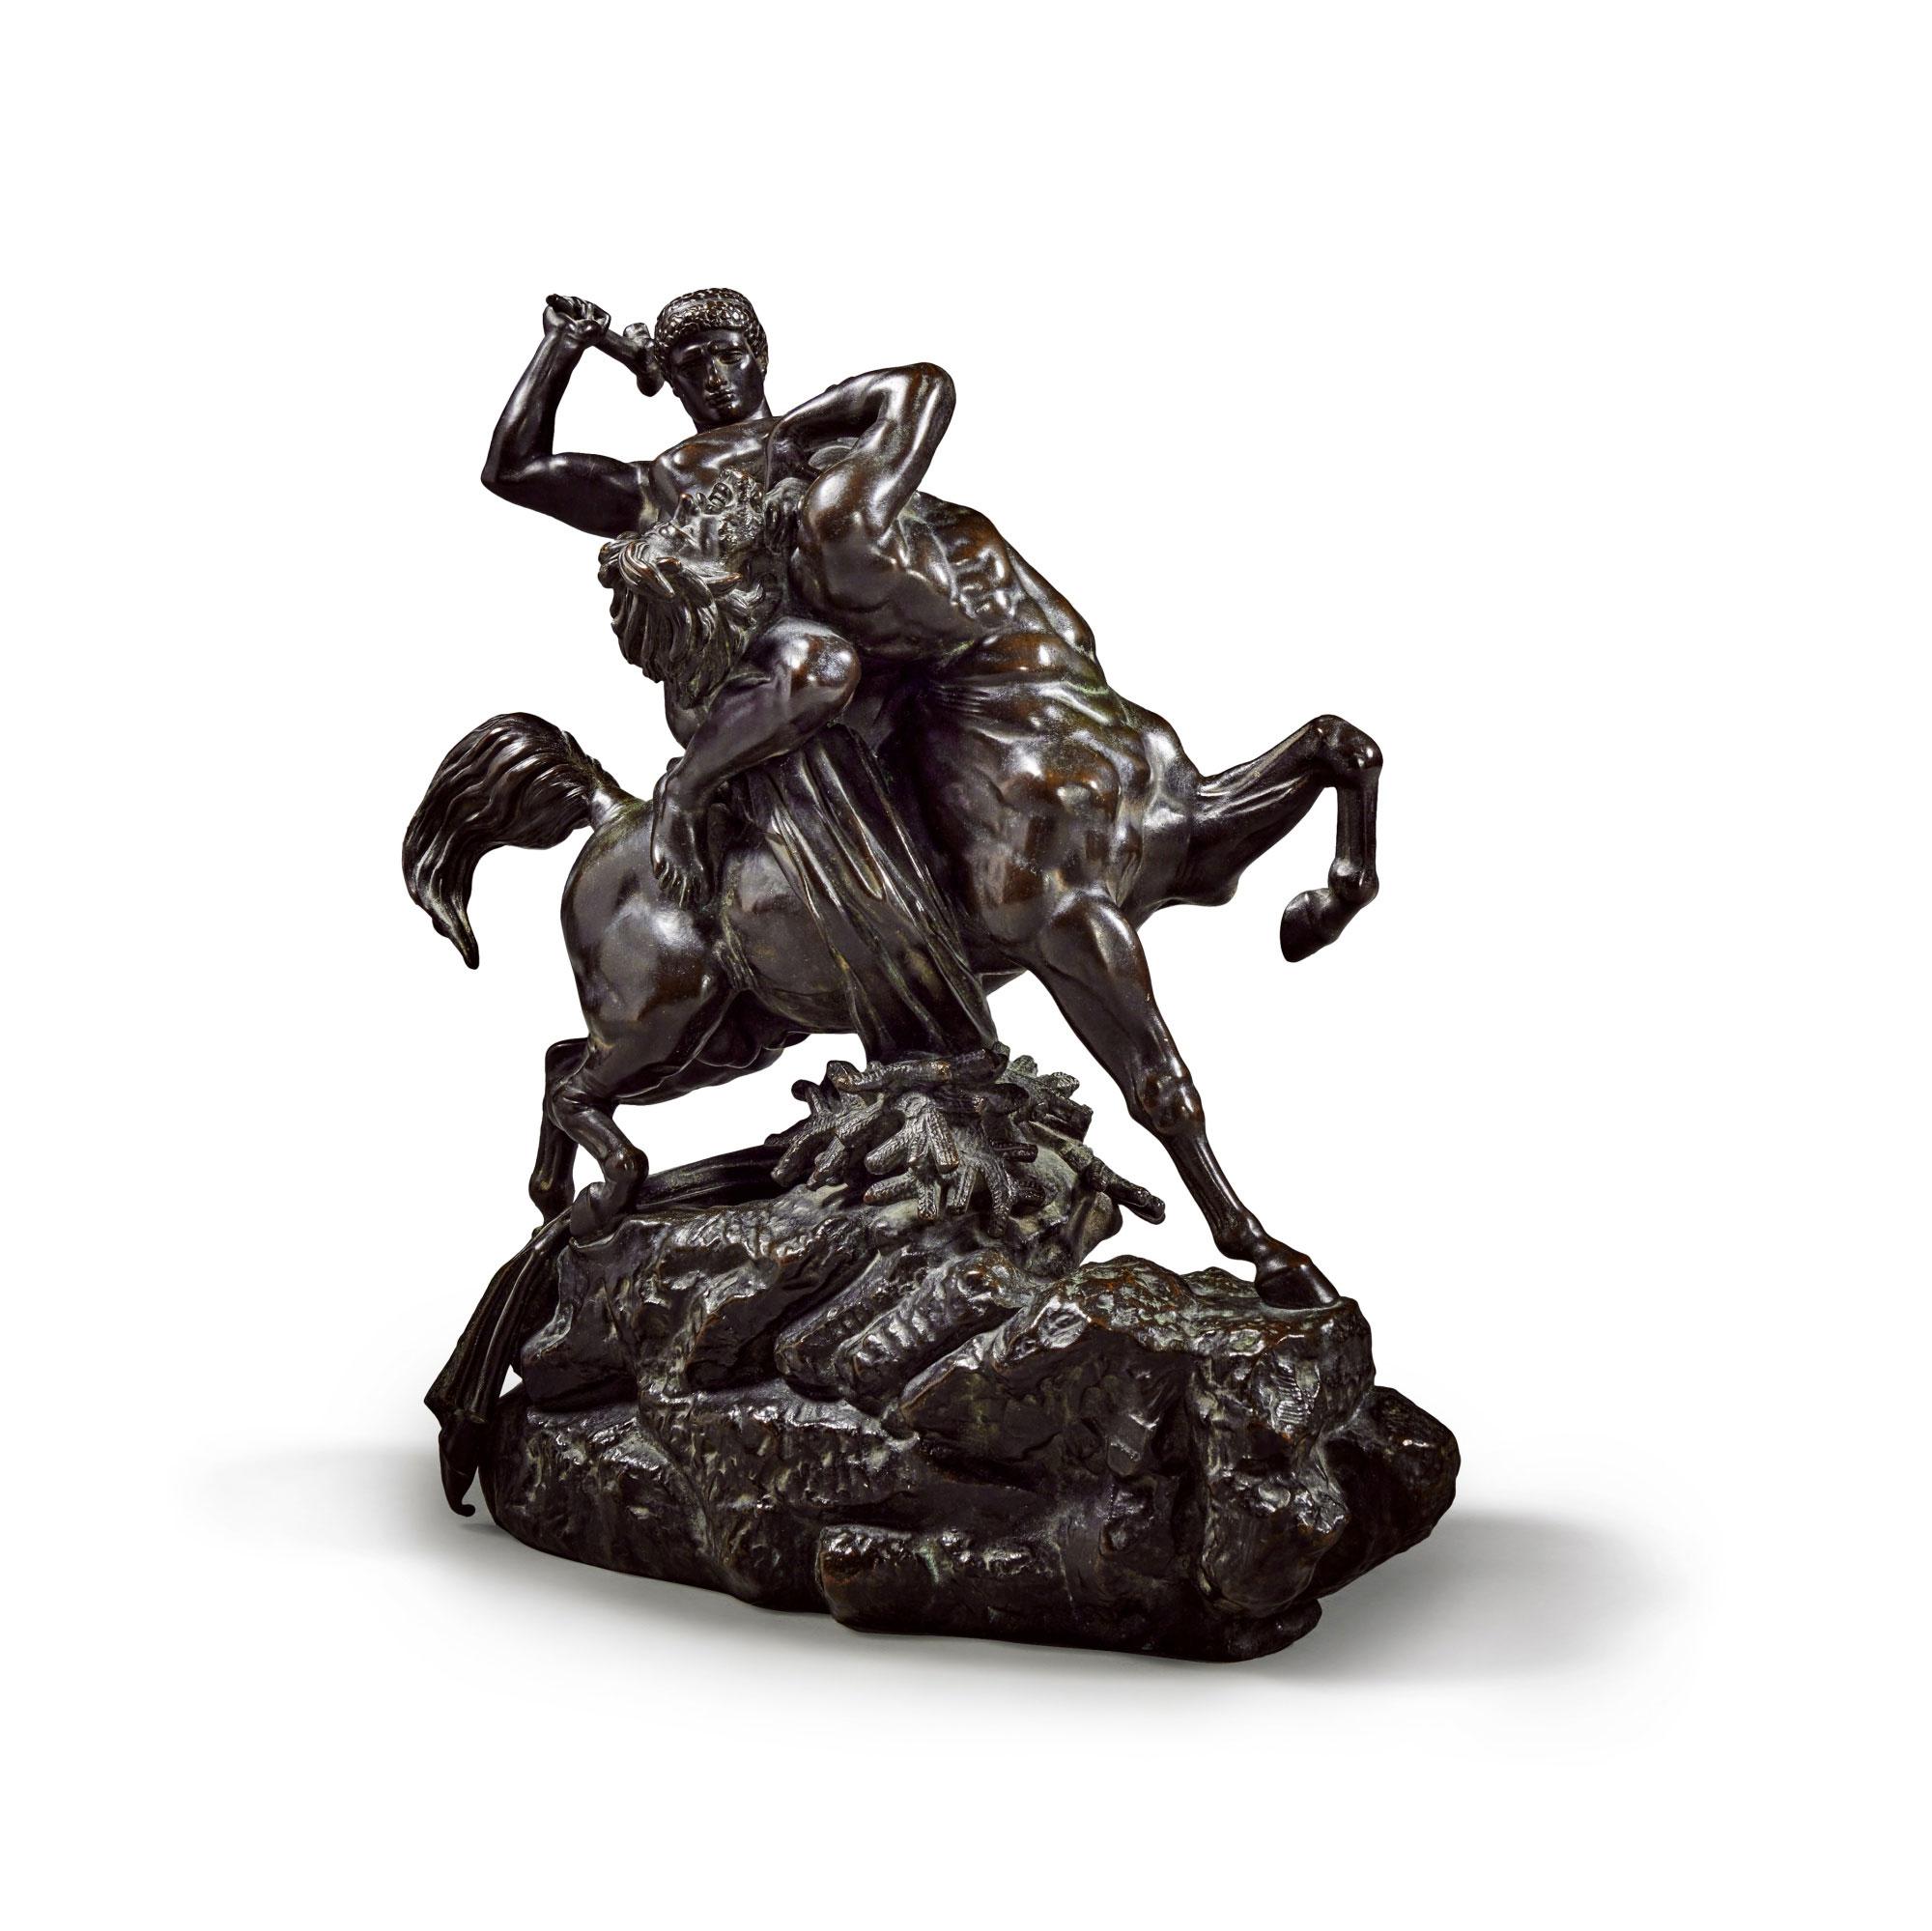 Gorgeously dynamic sculpture of Theseus and the Centaur depicted in mid battle. Thesus has mounted the centaur whom he attempts to strike with a large stick. Thesus twists the Centaur's neck to face him as the mythical being's long hair and beard